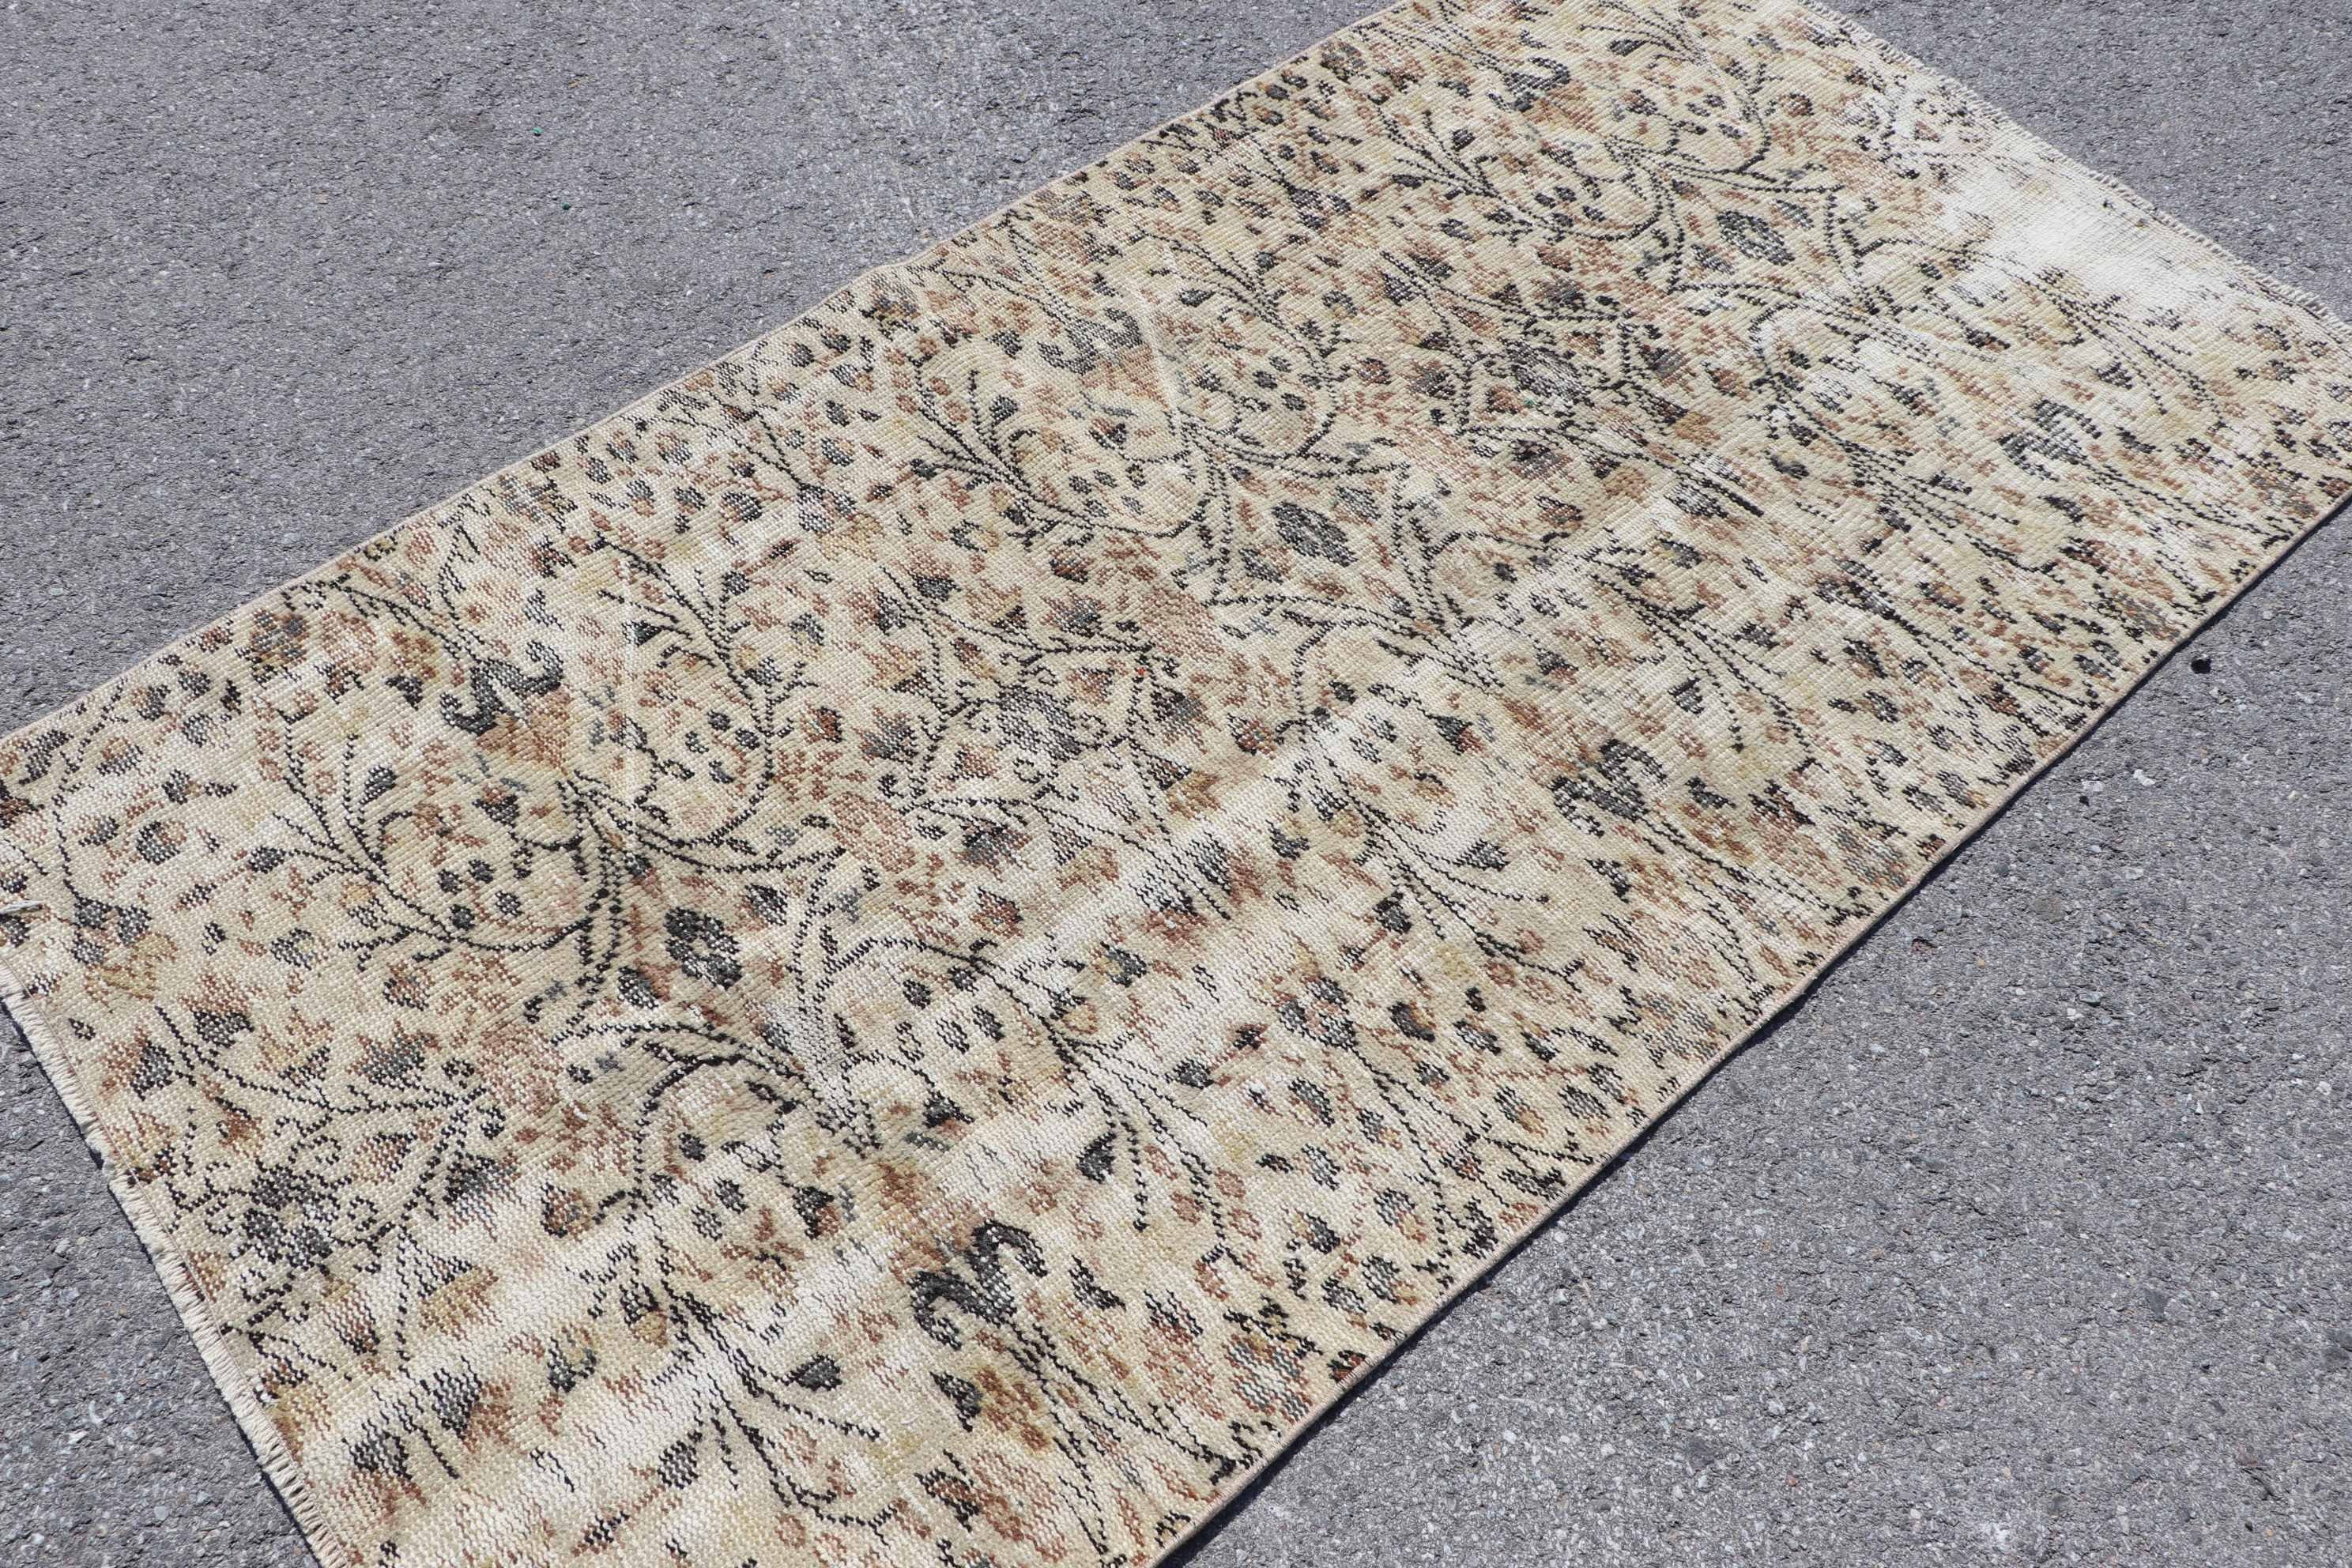 Turkish Rugs, Brown Anatolian Rug, Turkey Rug, Bedroom Rug, Entry Rugs, Vintage Rug, 3.5x6.5 ft Accent Rug, Antique Rugs, Kitchen Rug